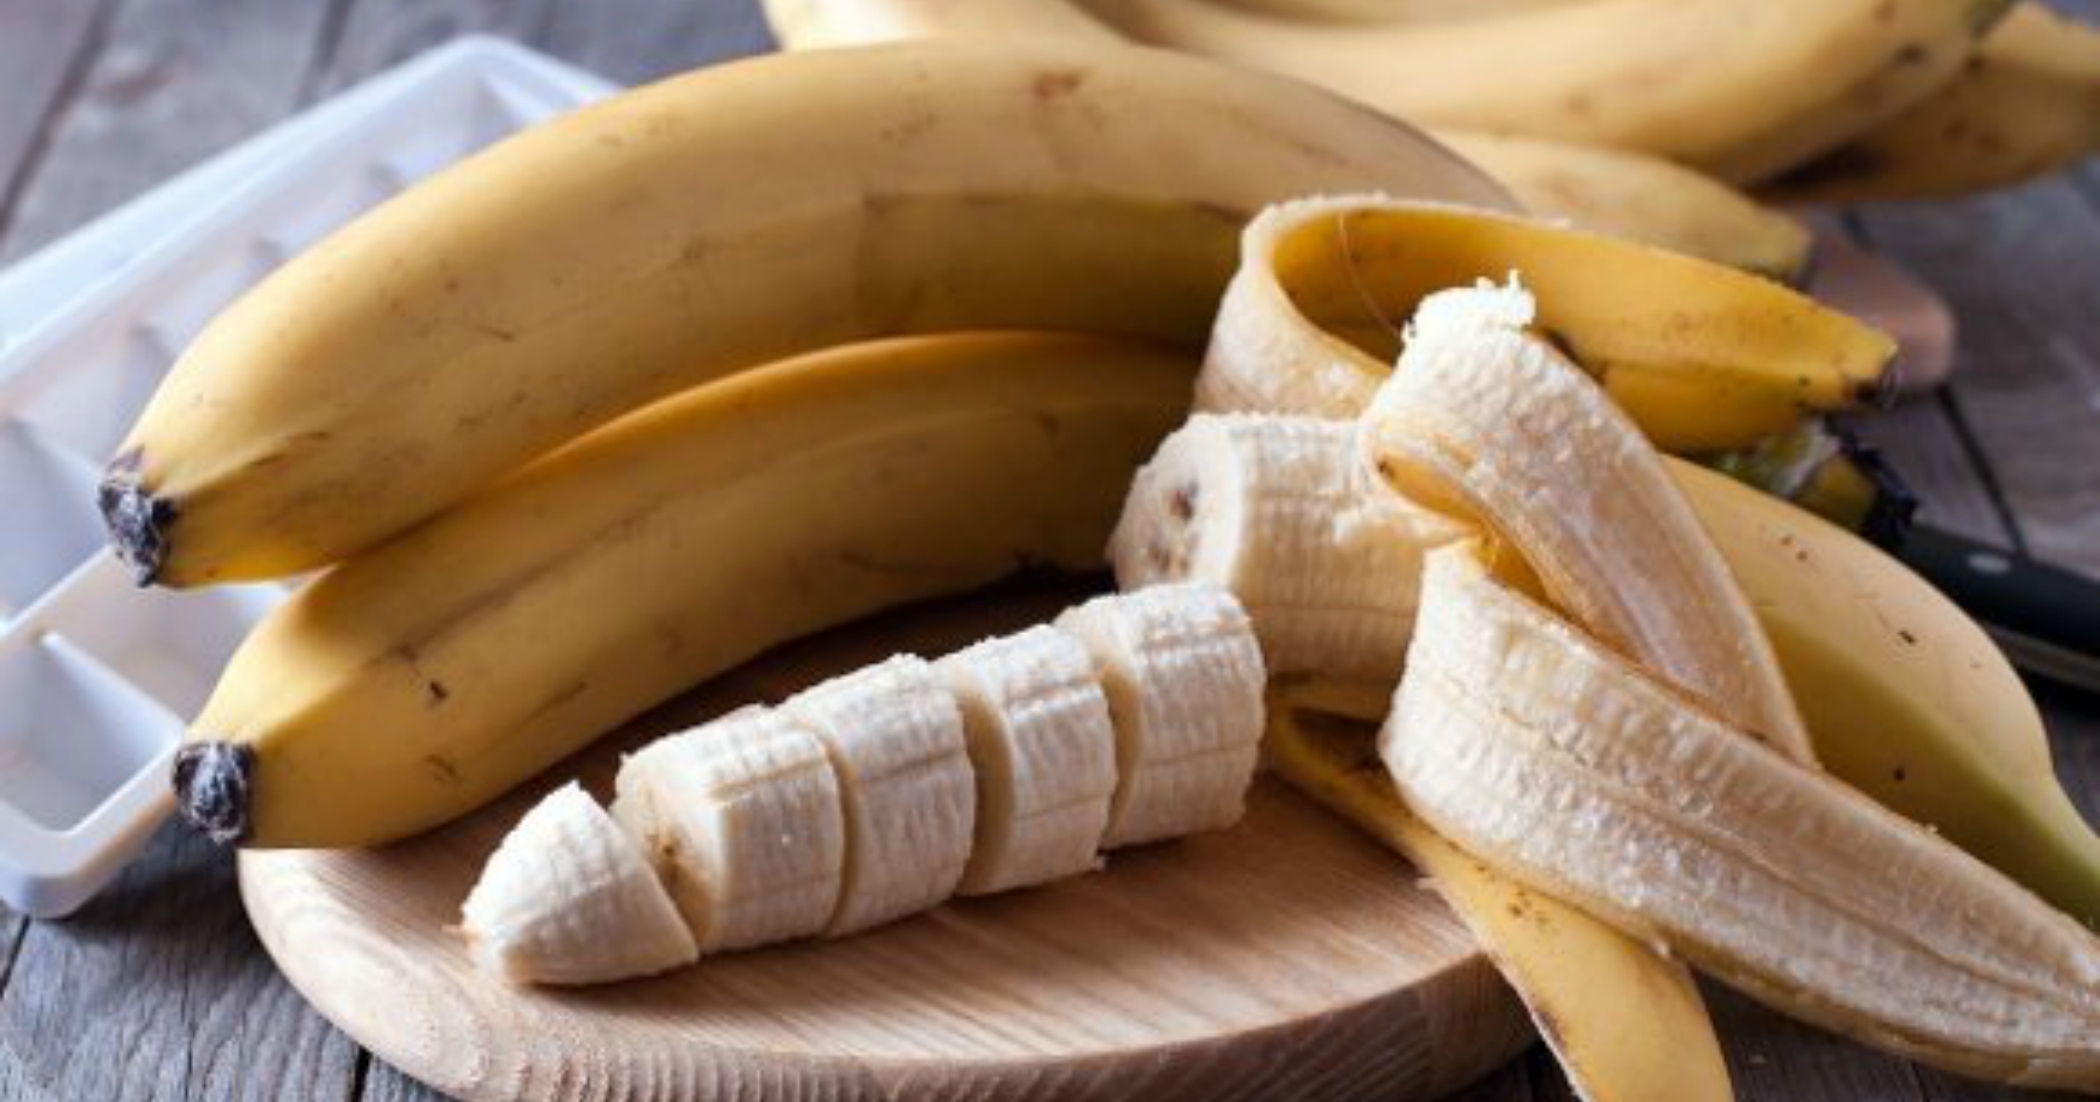 Can Eating Bananas Help You Lose Weight? Yes - Because They’re The